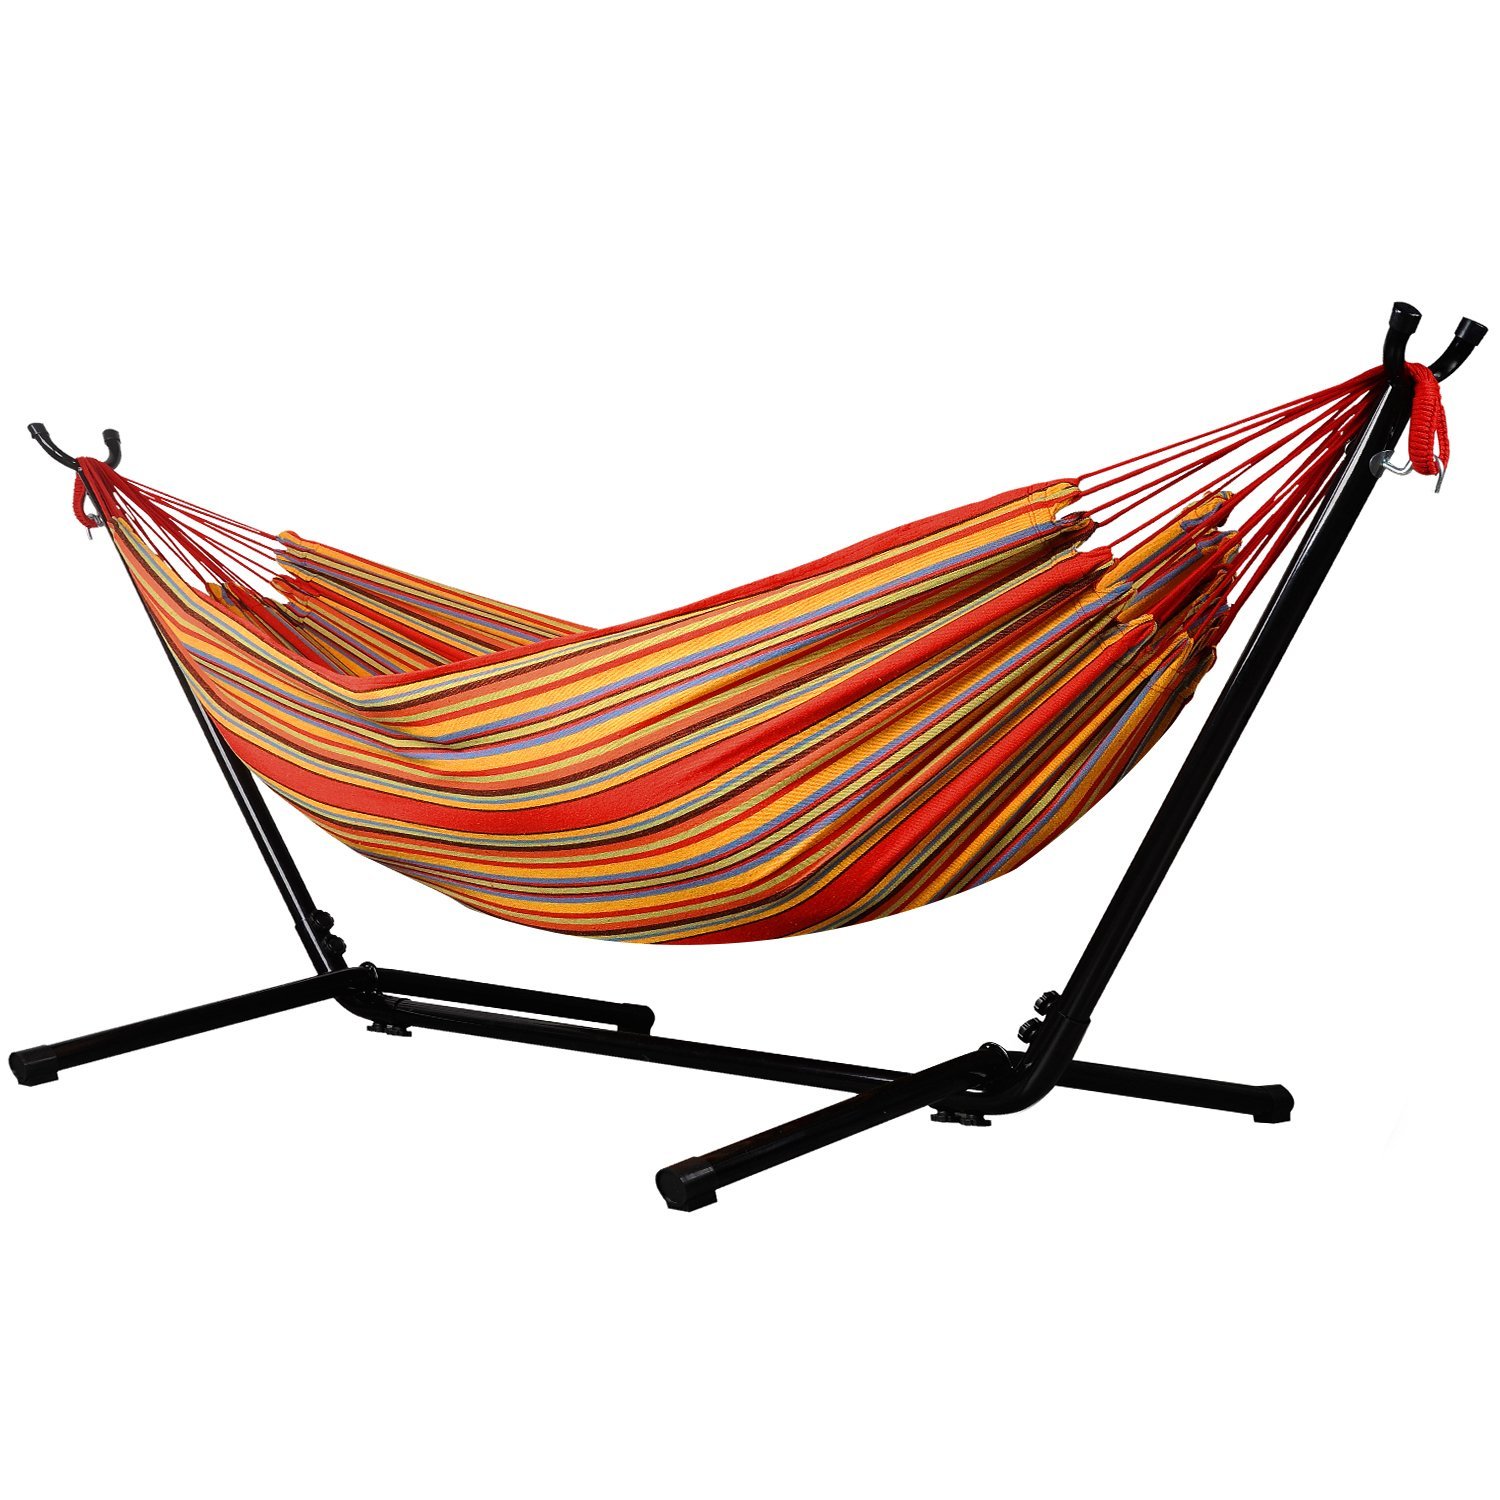 2019 New Pattern Garden Cotton Polyester Fabric Hammock With Iron Stand